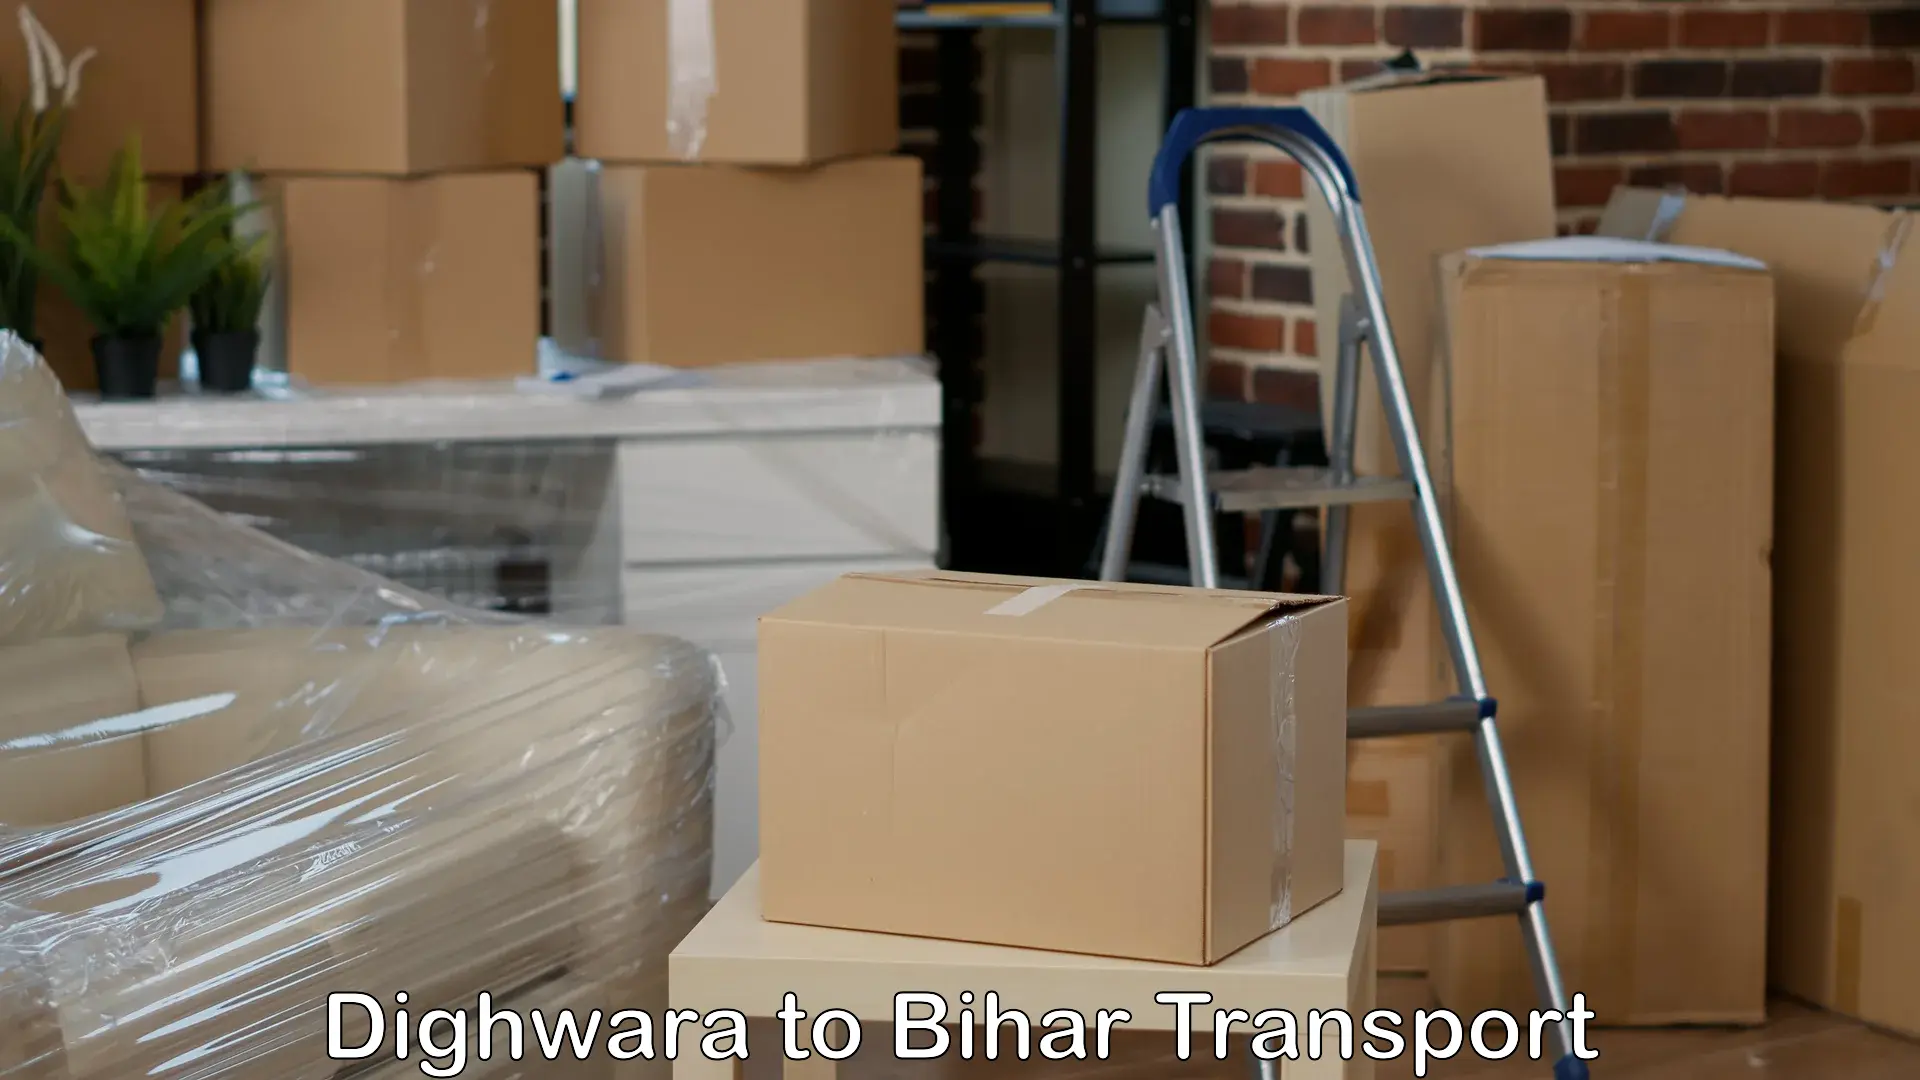 Container transport service in Dighwara to Barbigha